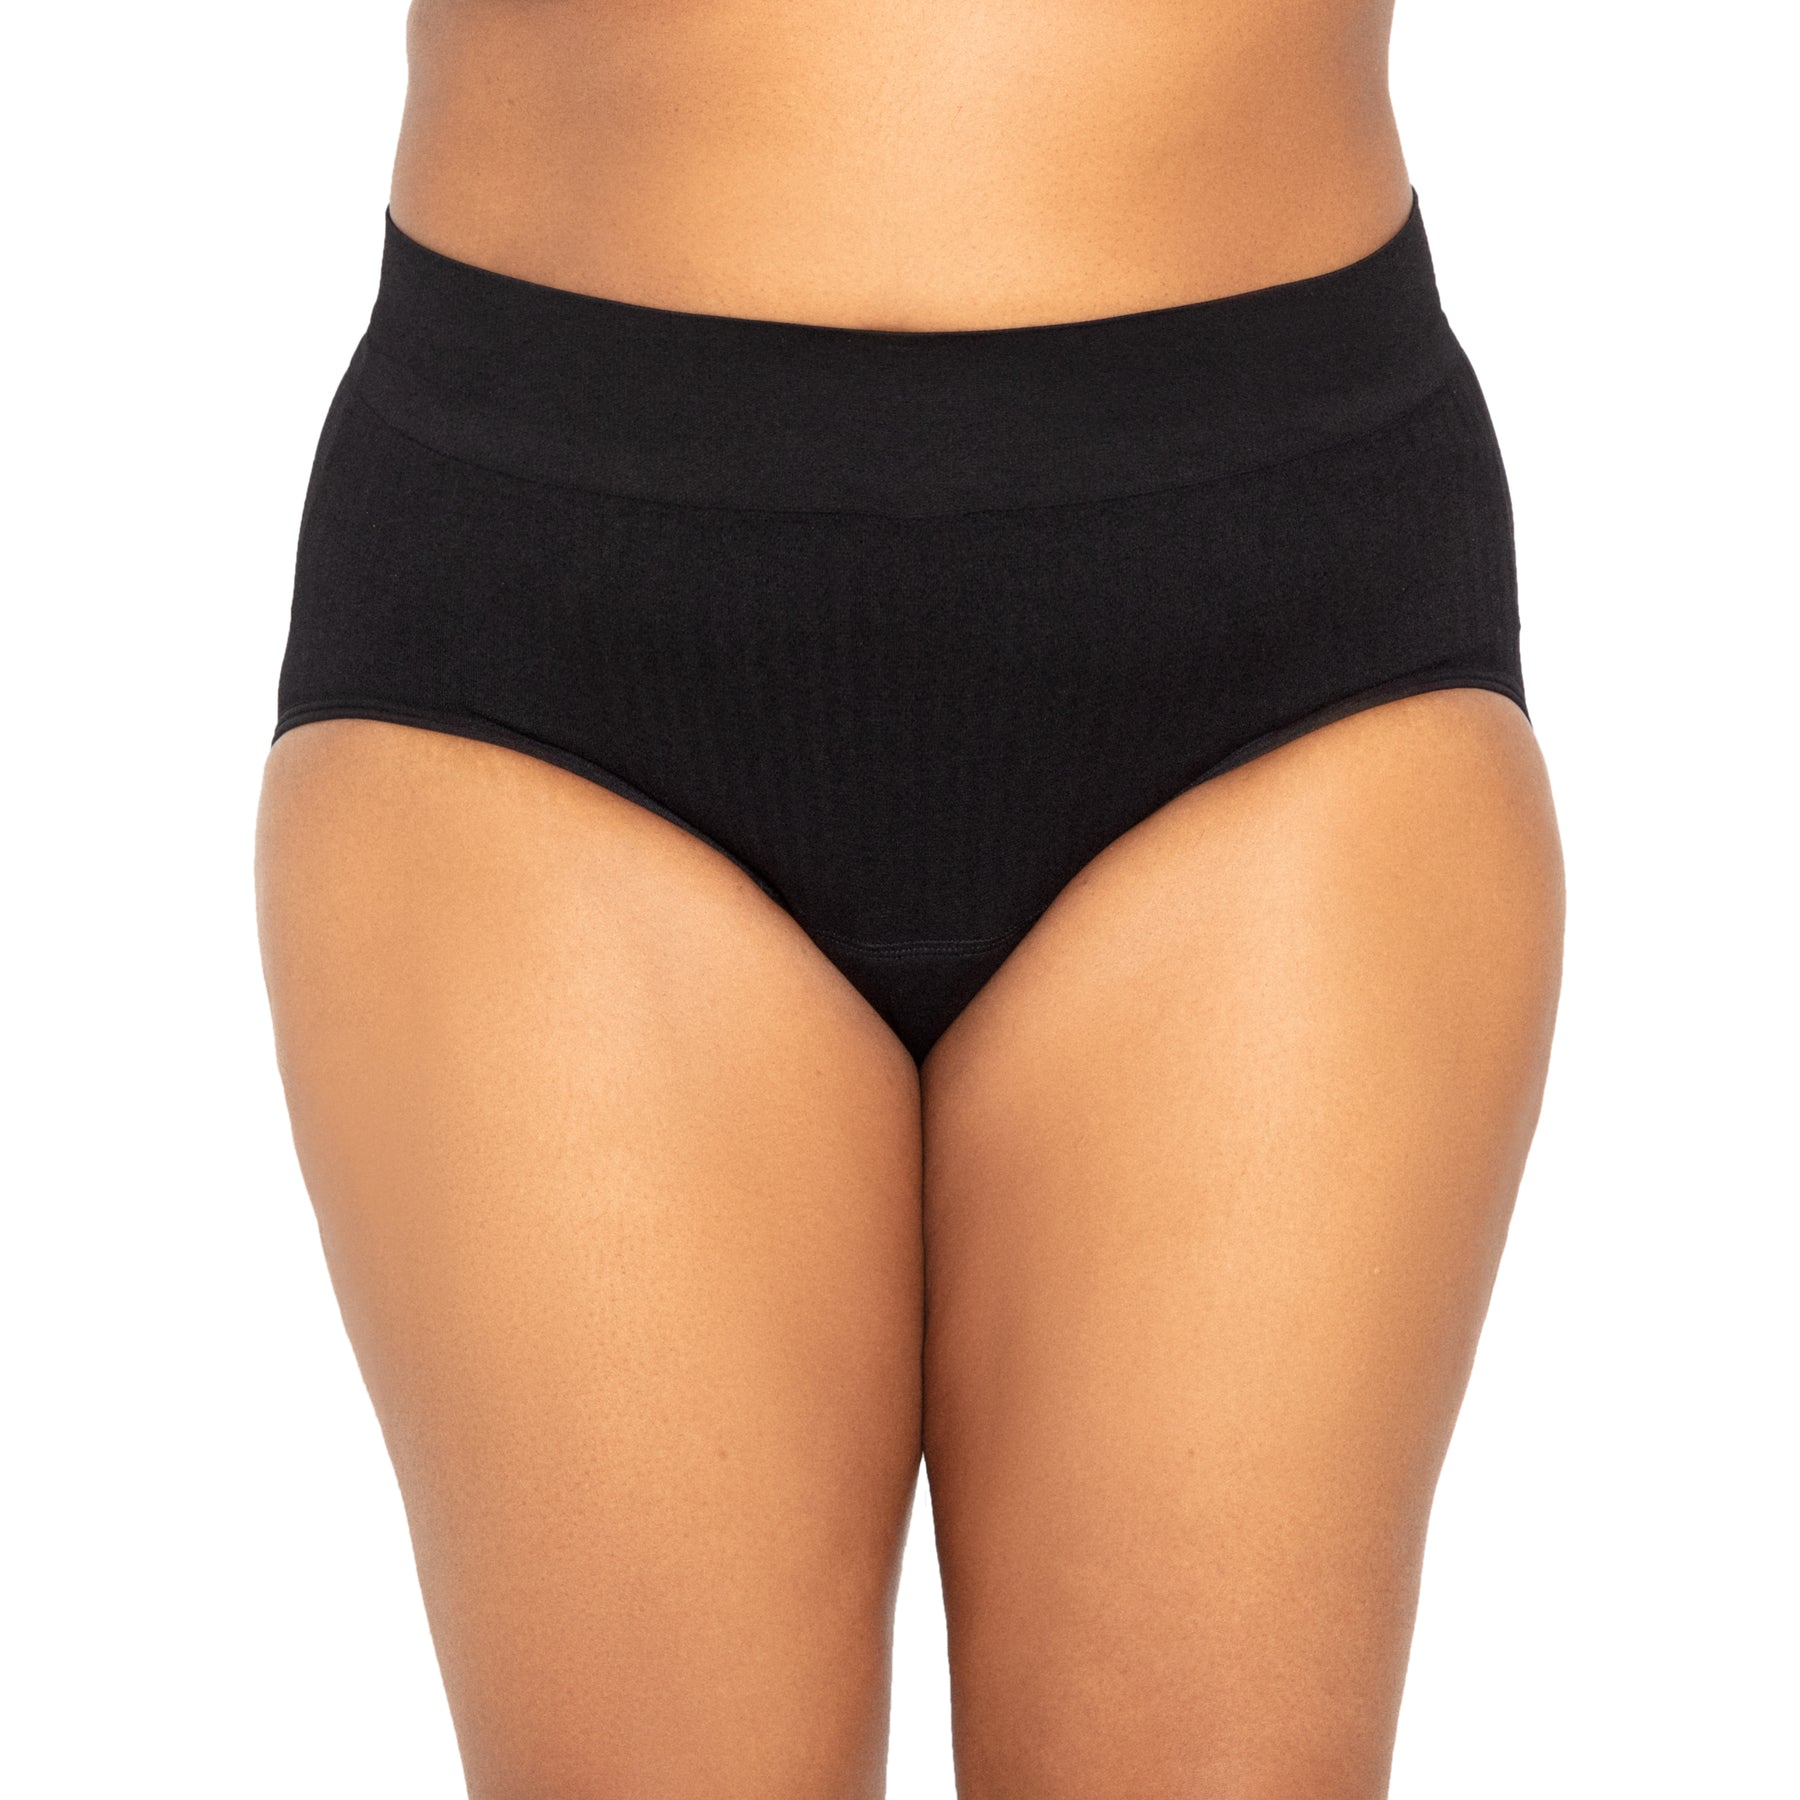 The Period Company The Sporty Thong Period Underwear  Urban Outfitters  Japan - Clothing, Music, Home & Accessories